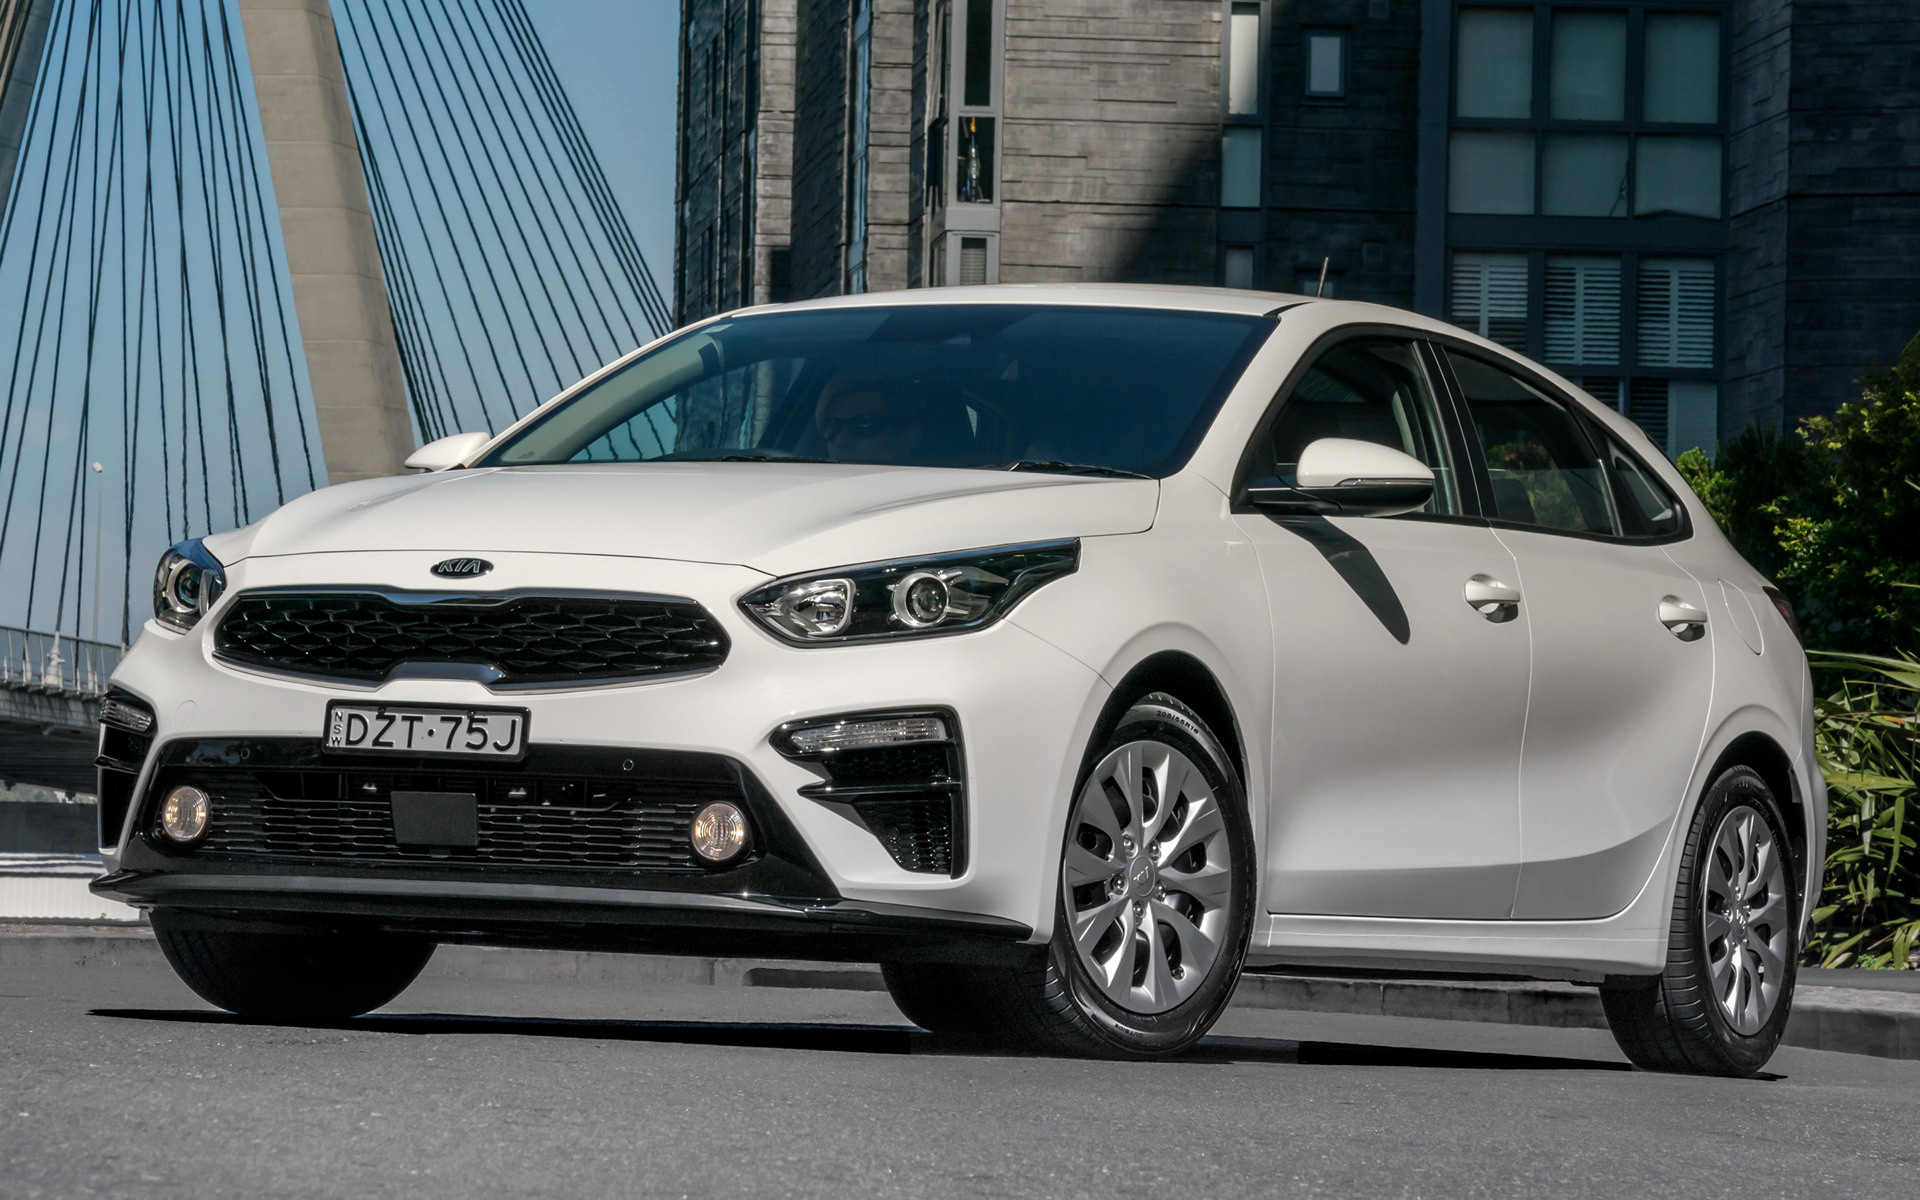 2019 Kia Cerato Hatch (AU) - Wallpapers and HD Images | Car Pixel